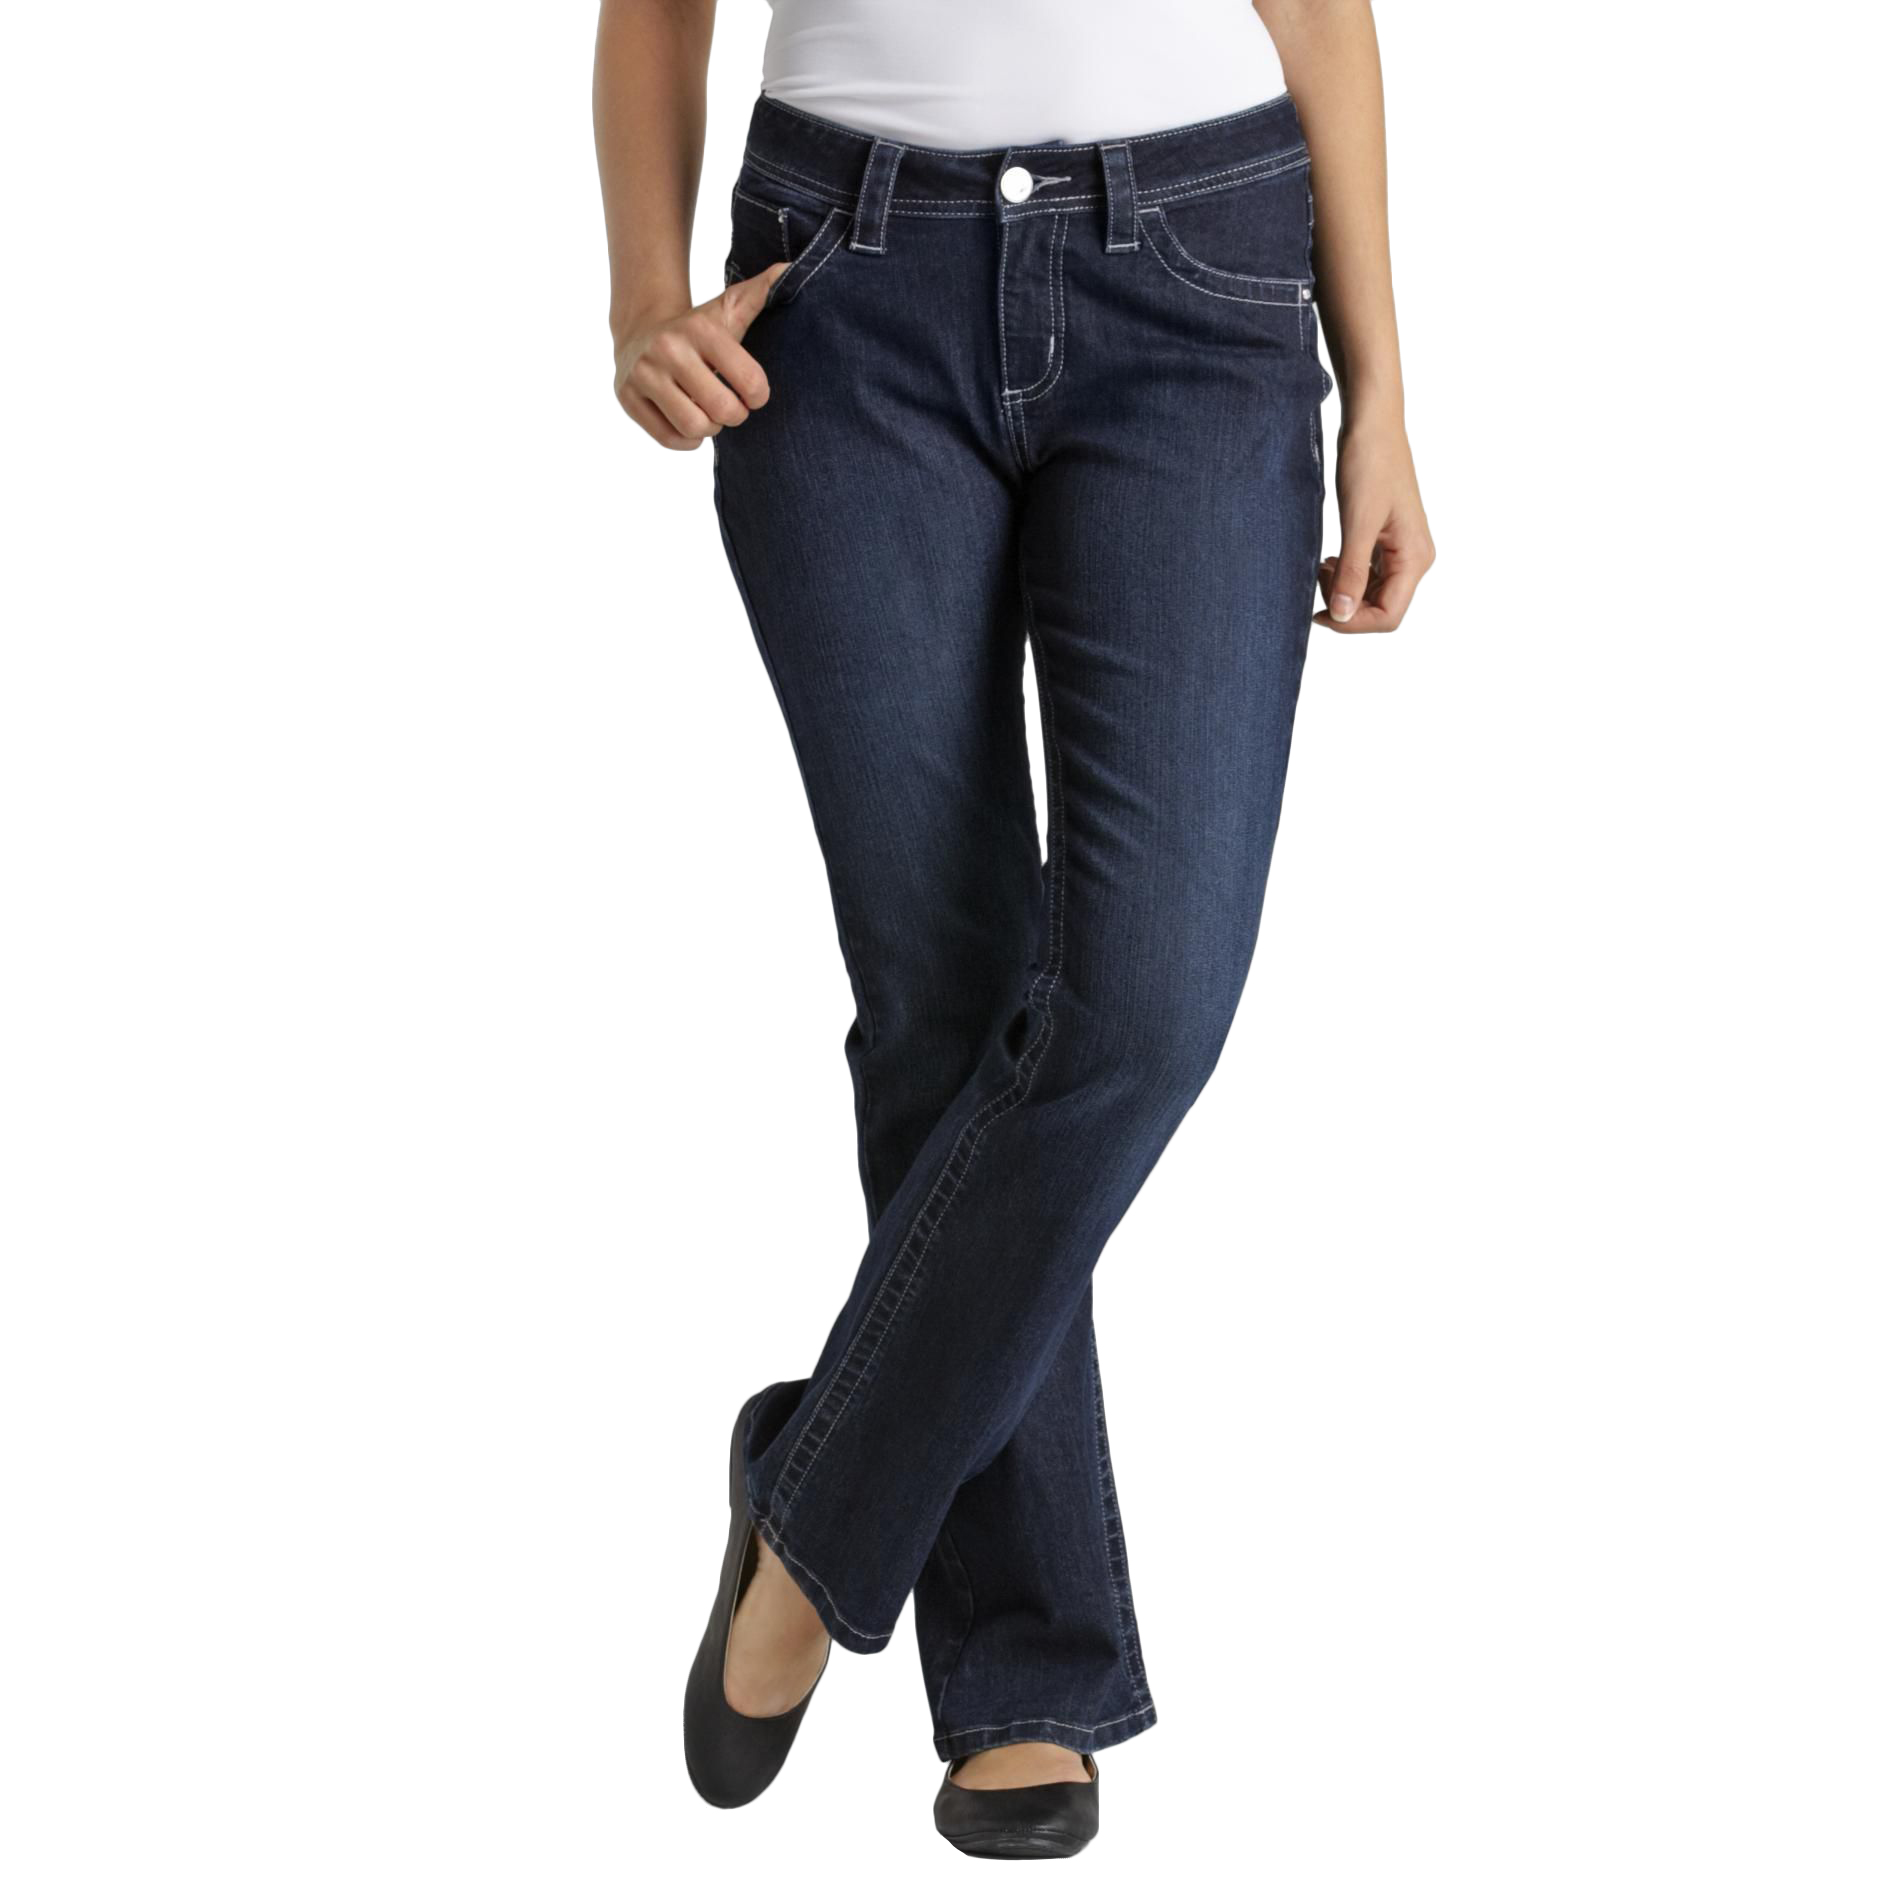 LEE Women's Curvy-Fit Bootcut Jeans - Clothing - Women's Clothing ...